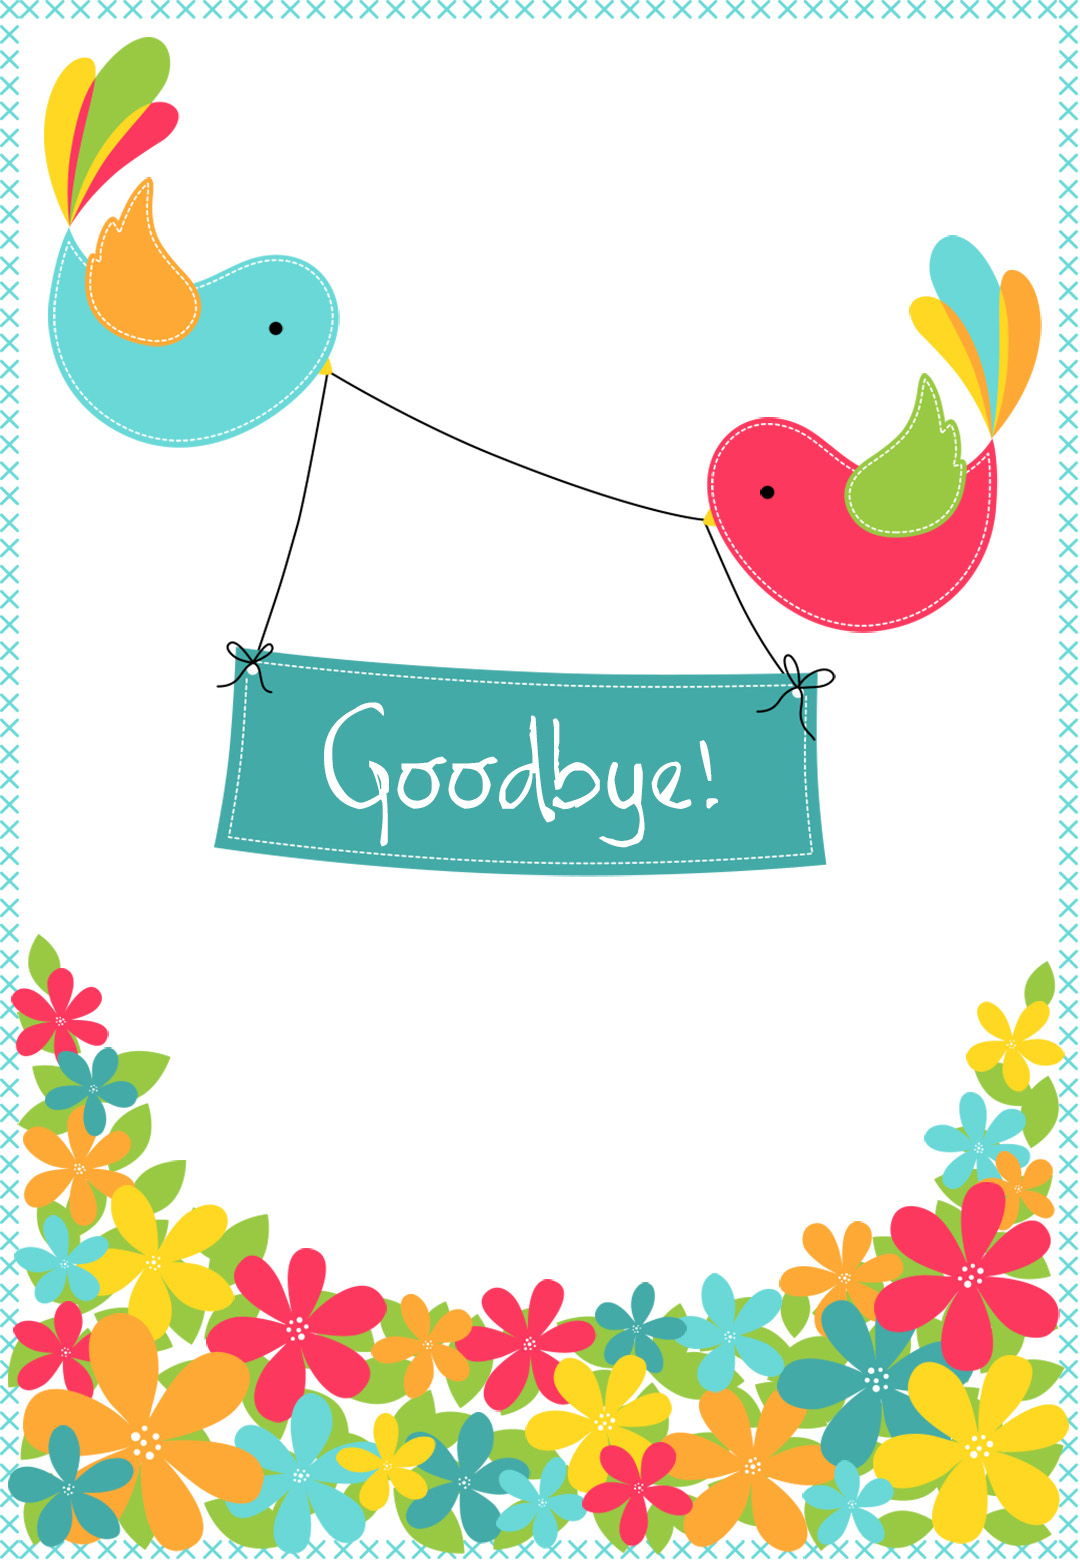 Goodbye From Your Colleagues - Free Good Luck Card | Greetings Island - Free Printable Farewell Card For Coworker